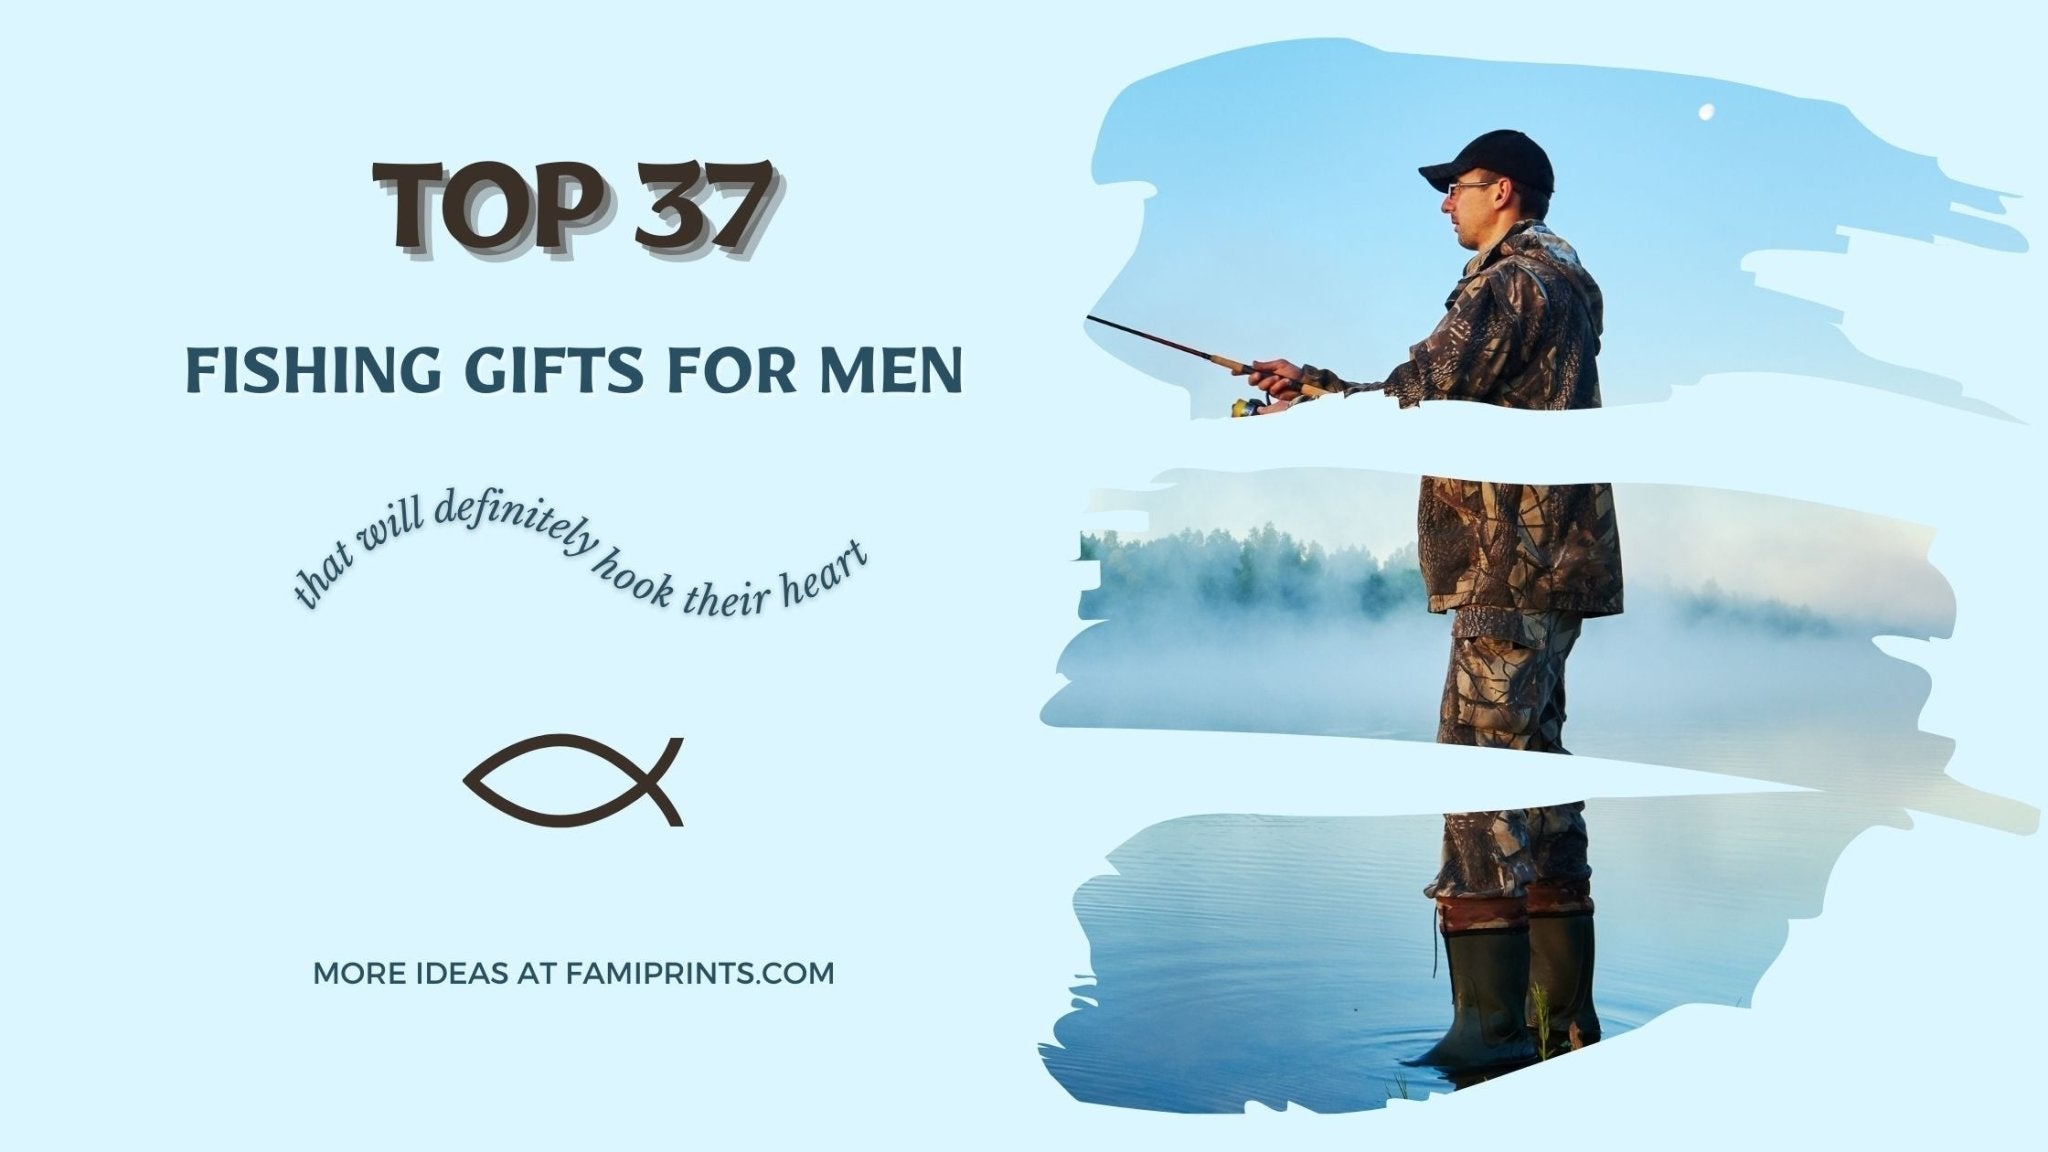 Top 37 Fishing Gifts For Men That'll Definitely Hook Their Heart - FamiPrints | Trending Customizable Family Gifts